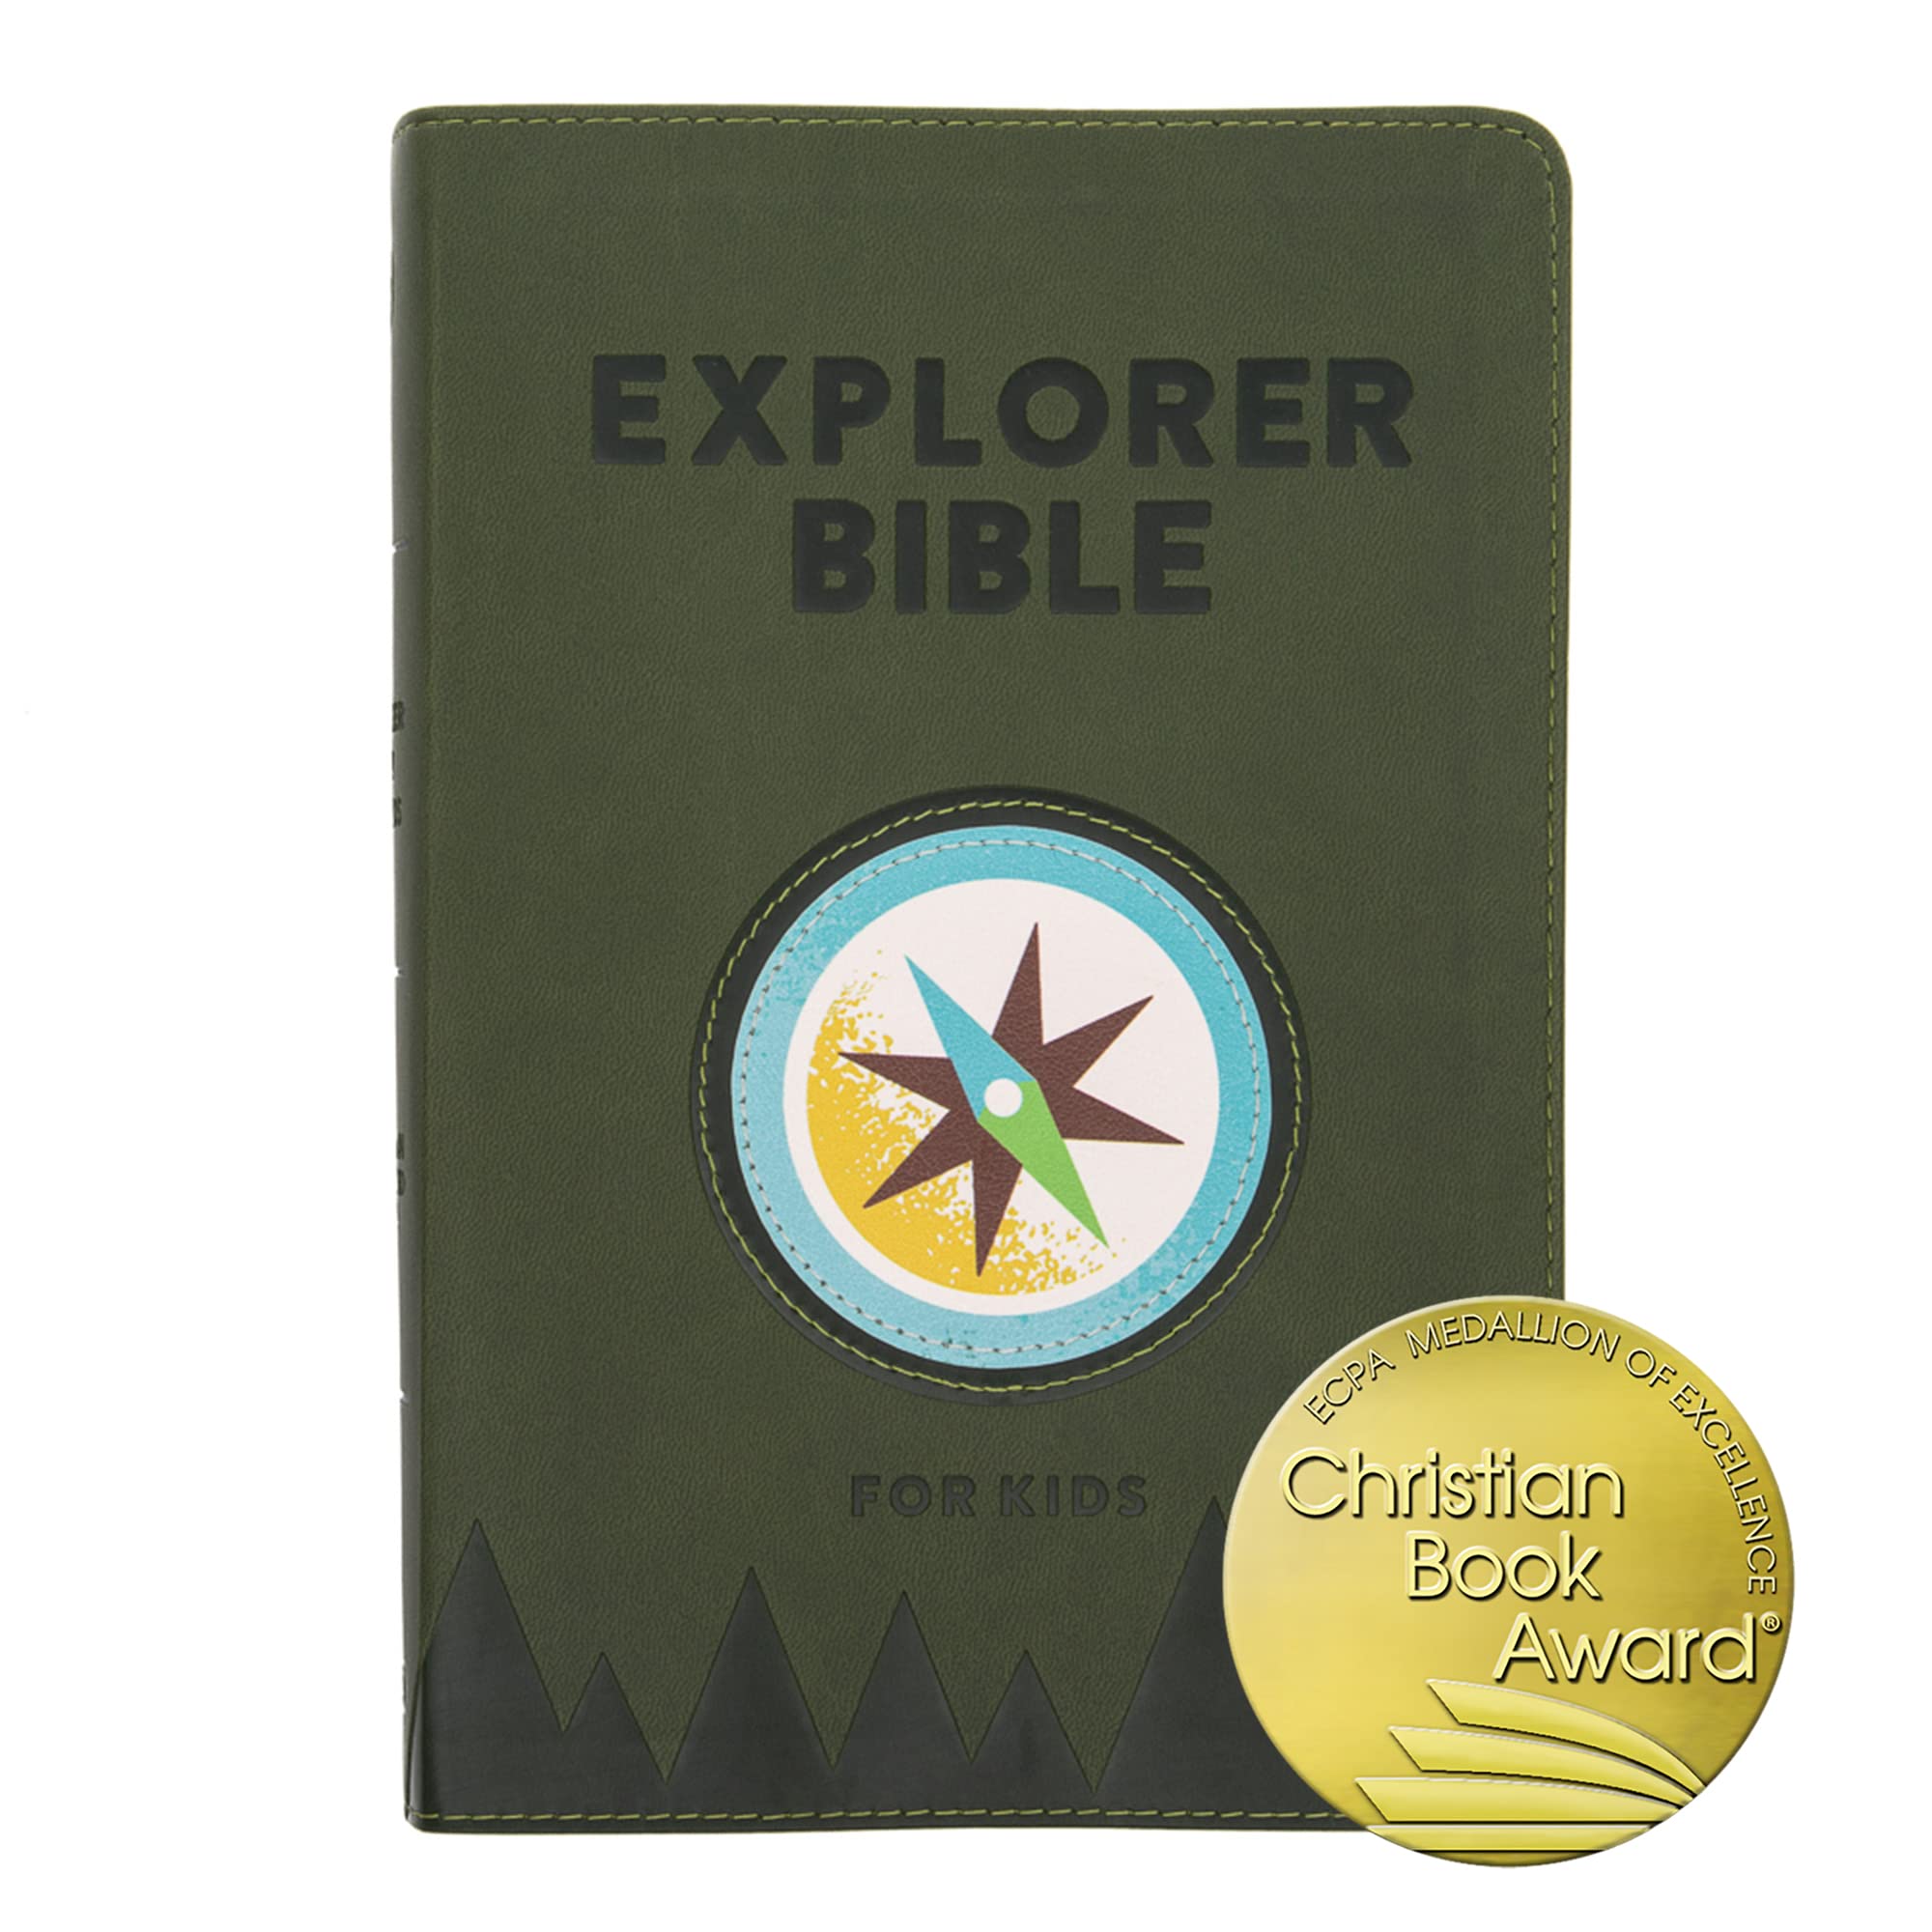 CSB Explorer Bible for Kids, Olive Compass LeatherTouch, Red Letter, Full-Color Design, Photos, Illustrations, Charts, Videos, Activities, Easy-to-Read Bible Serif Type